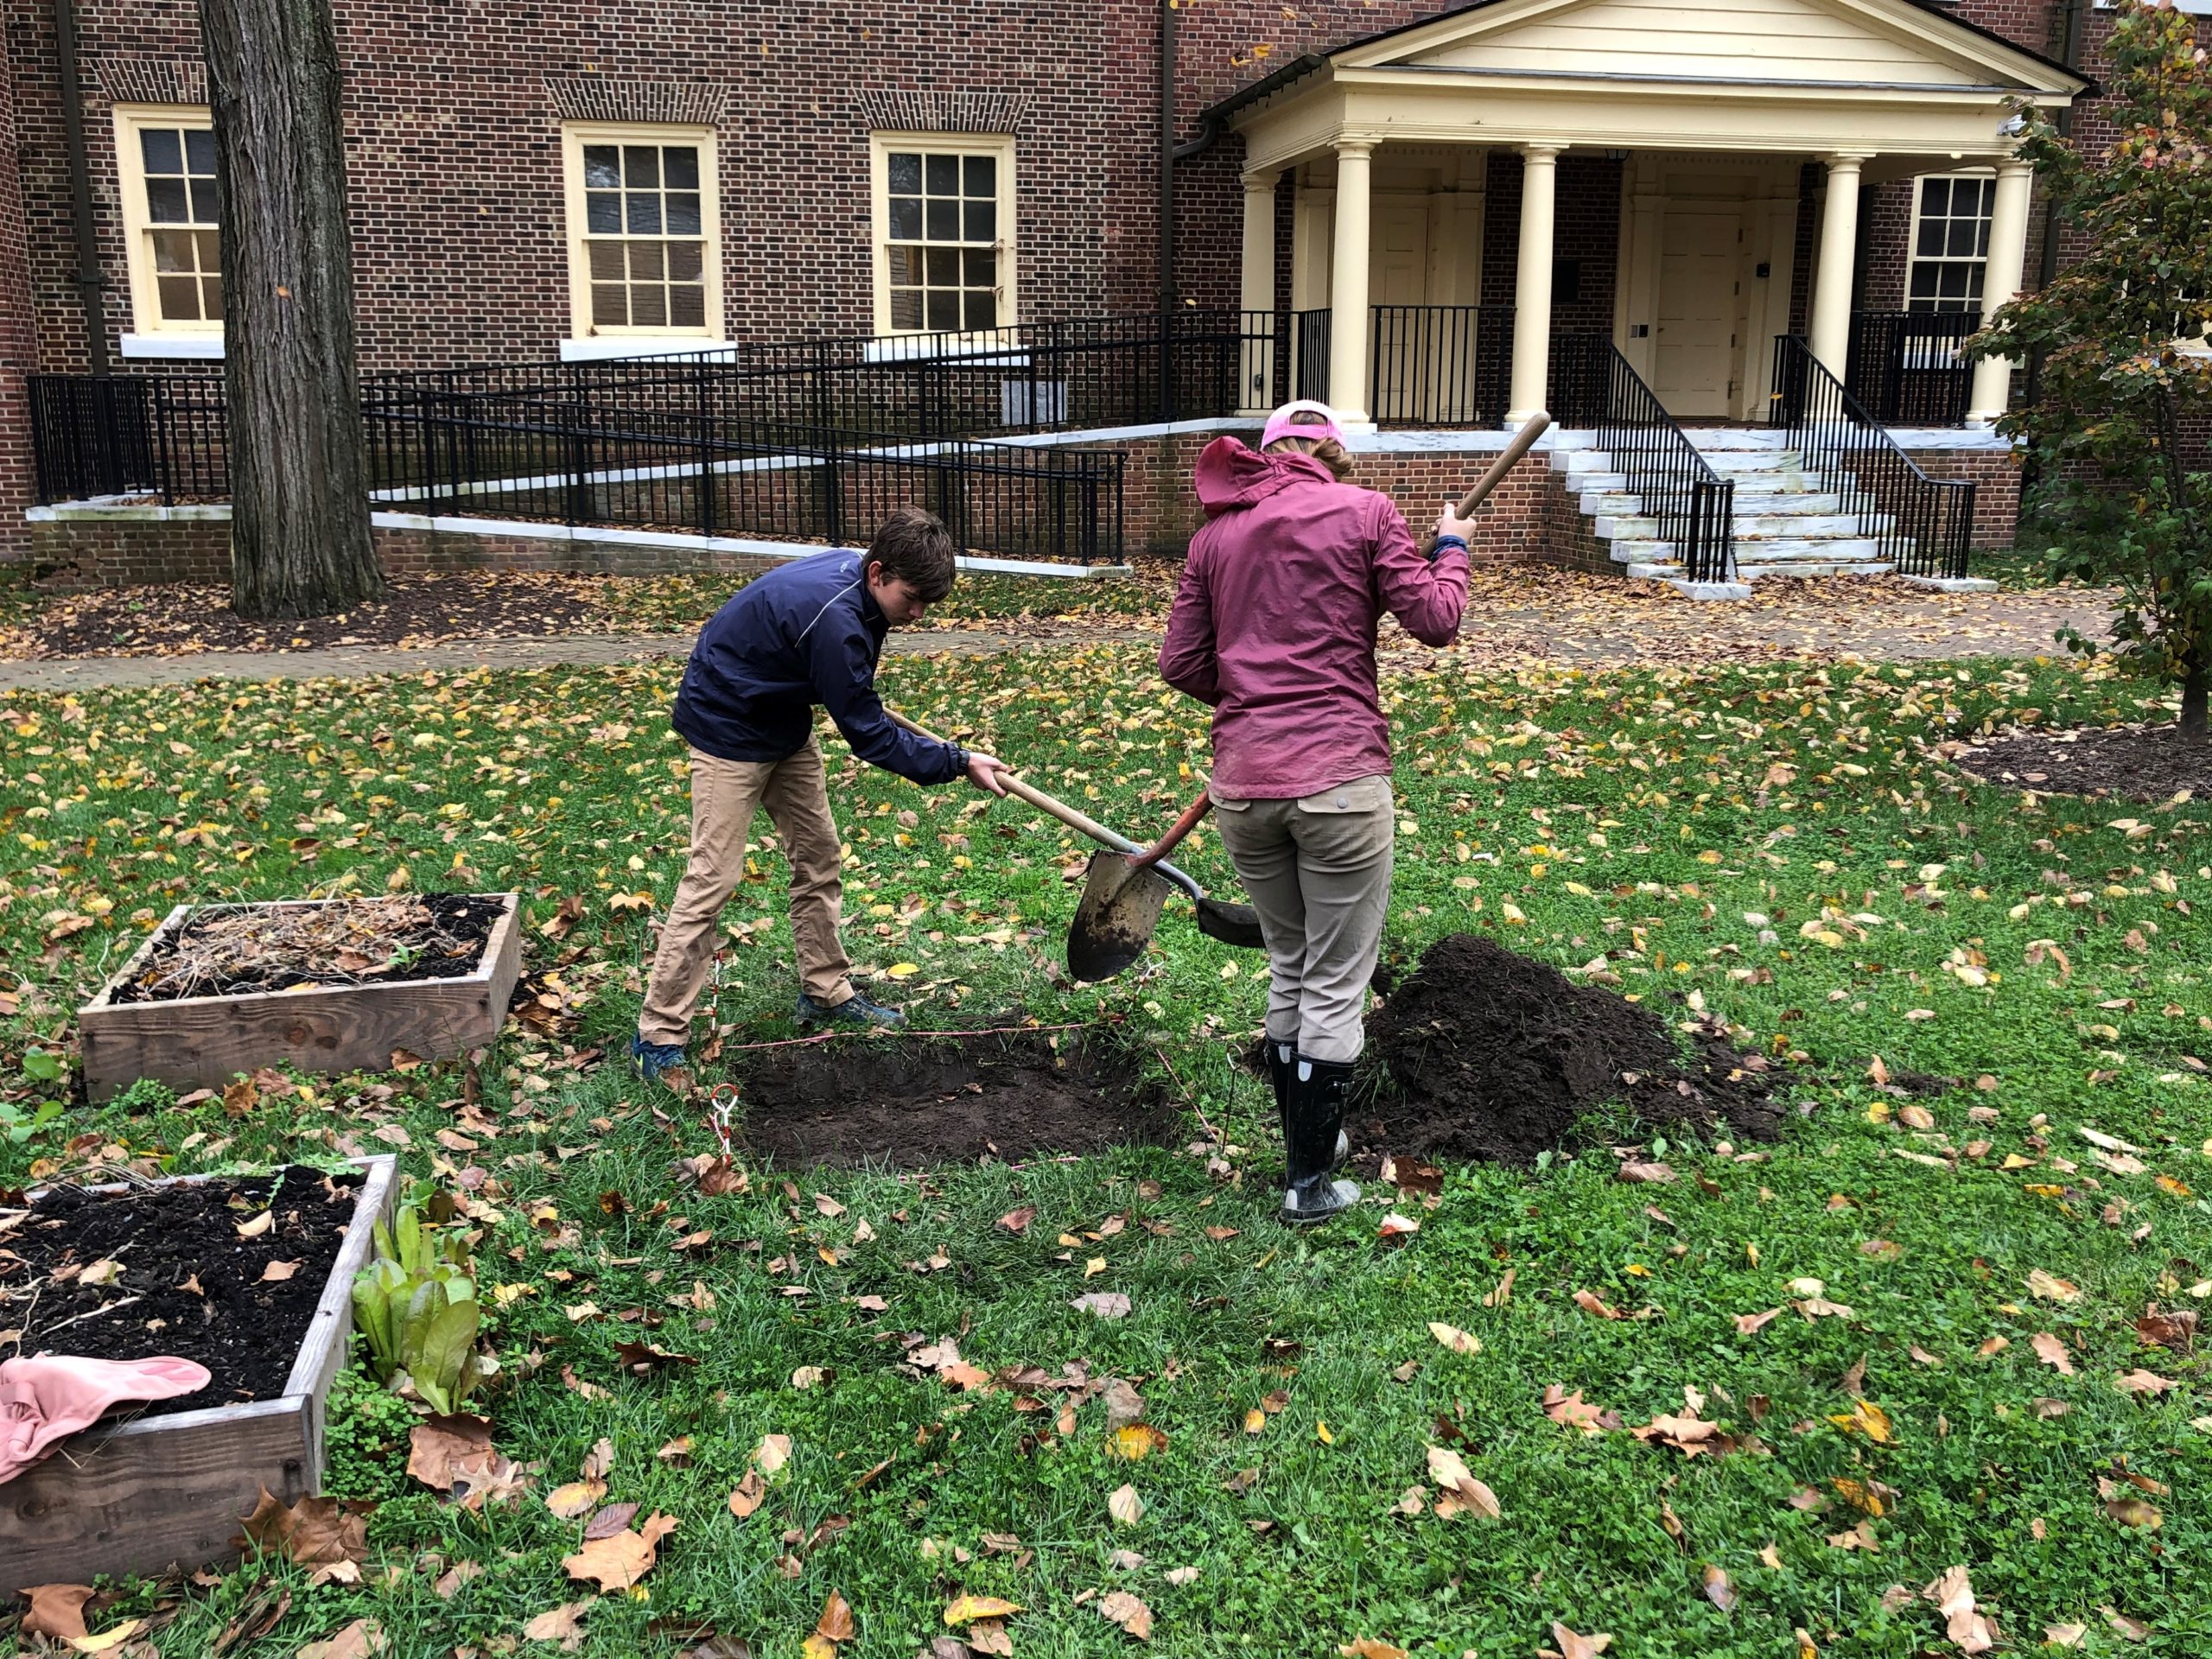 Volunteer archaeologists dig square test plots in grass of John Bell House in Dover, DE.